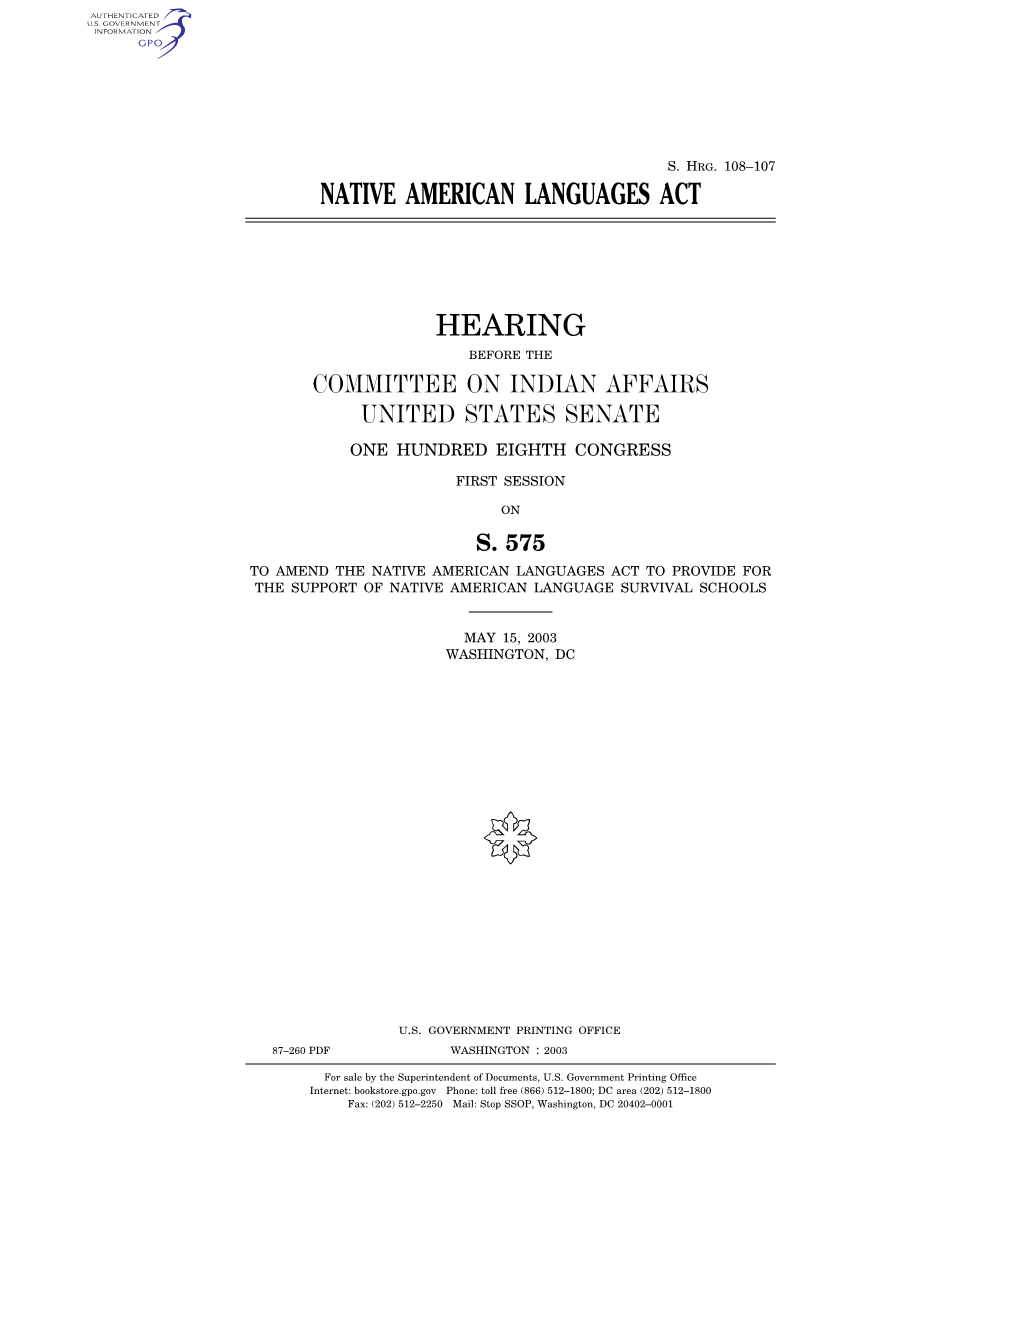 Native American Languages Act Hearing